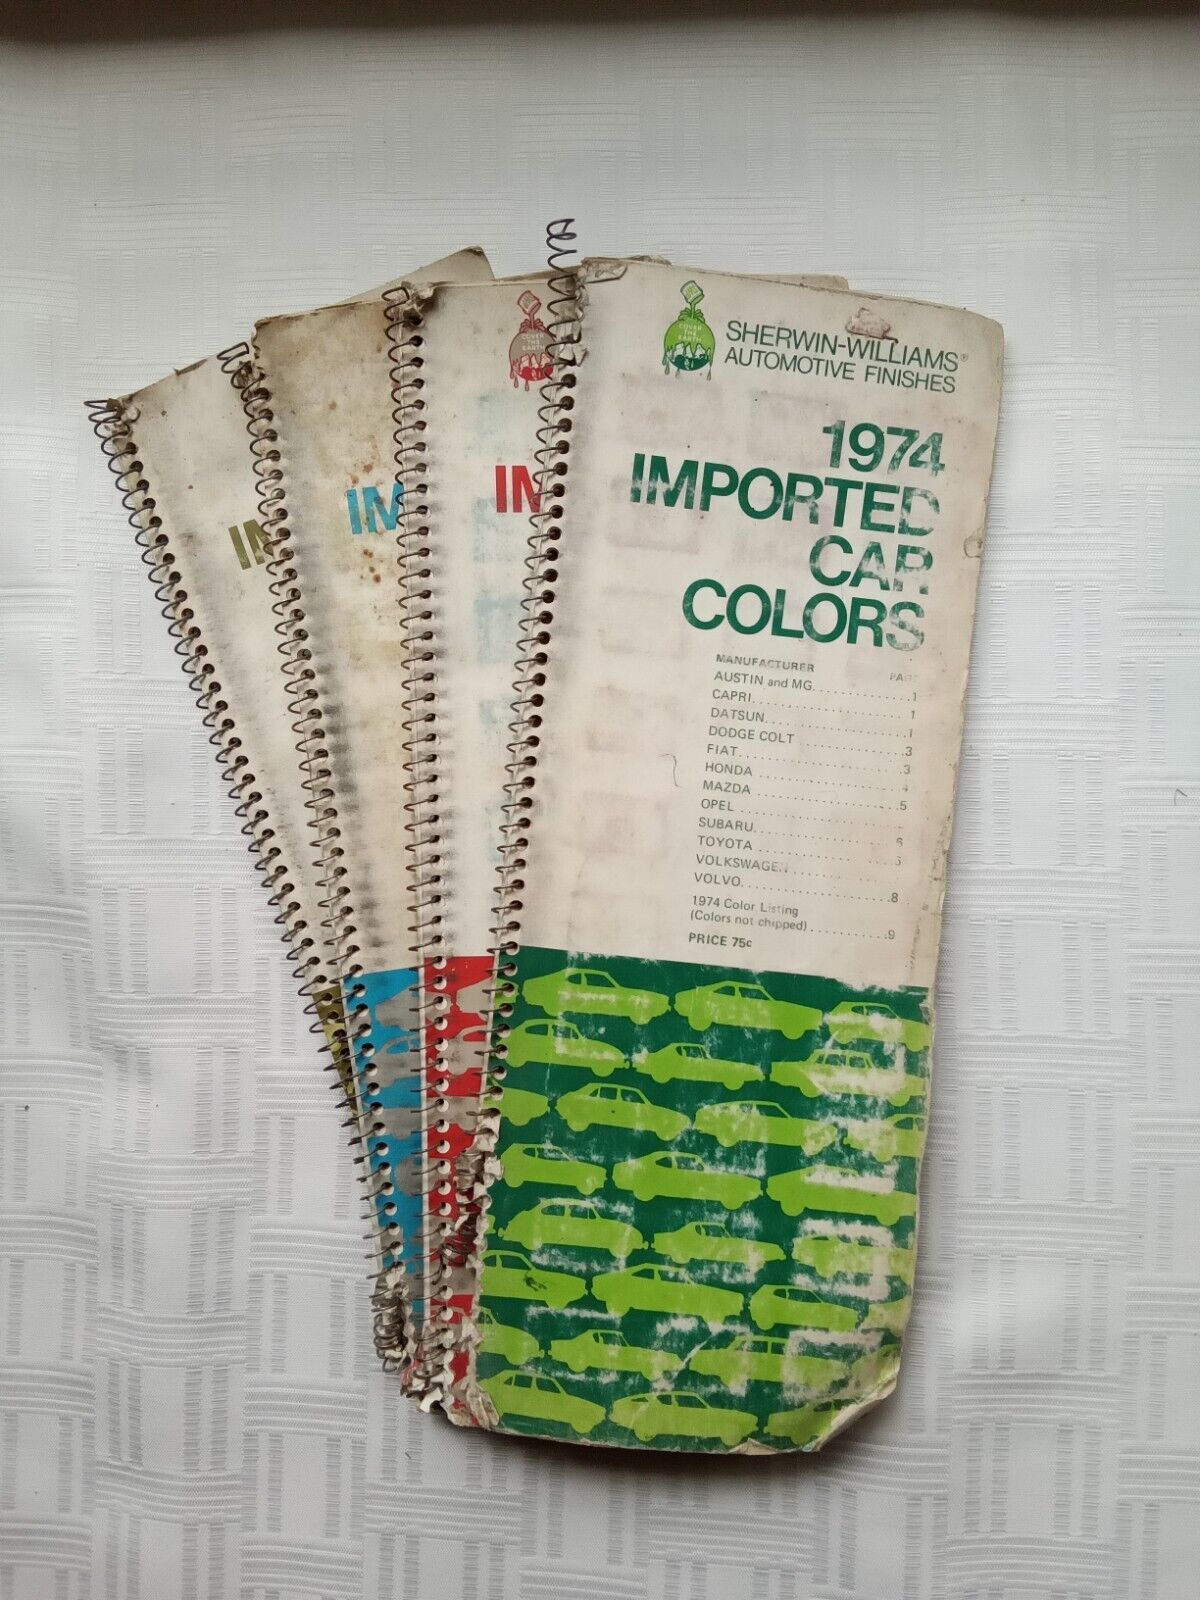 Lot Of 4 Sherwin Williams Imported Car Colors 1974-1977 Chip Books